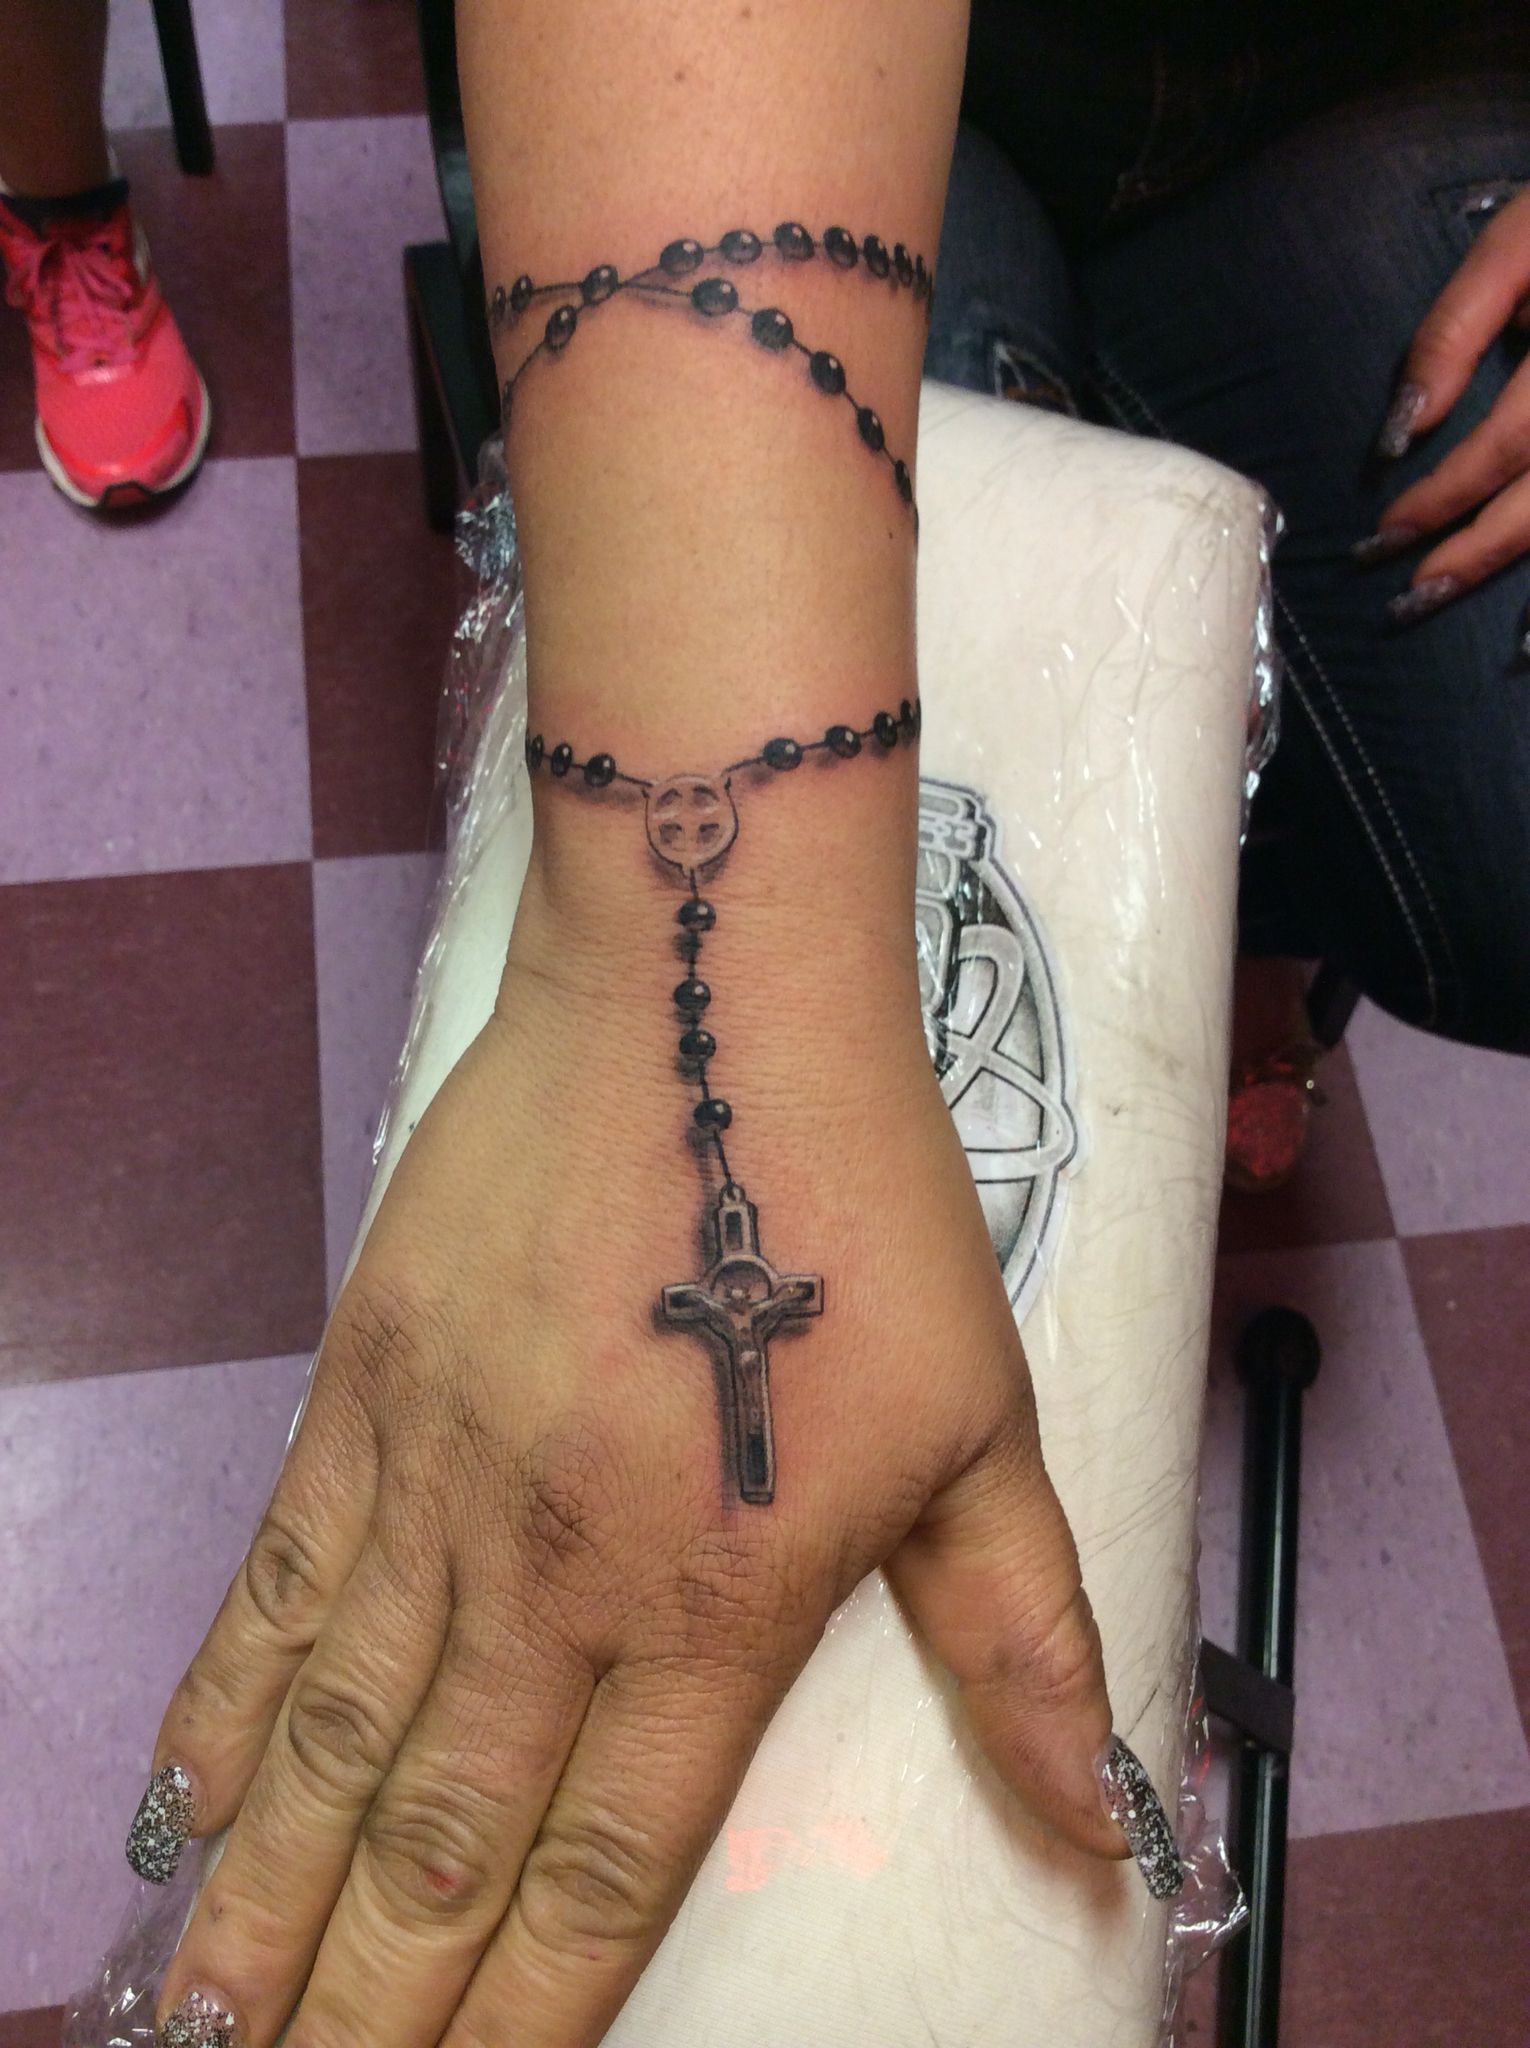 Rosary Tattoo Meaning: 7 Meaningful Reasons to Get a Rosary Tattoo